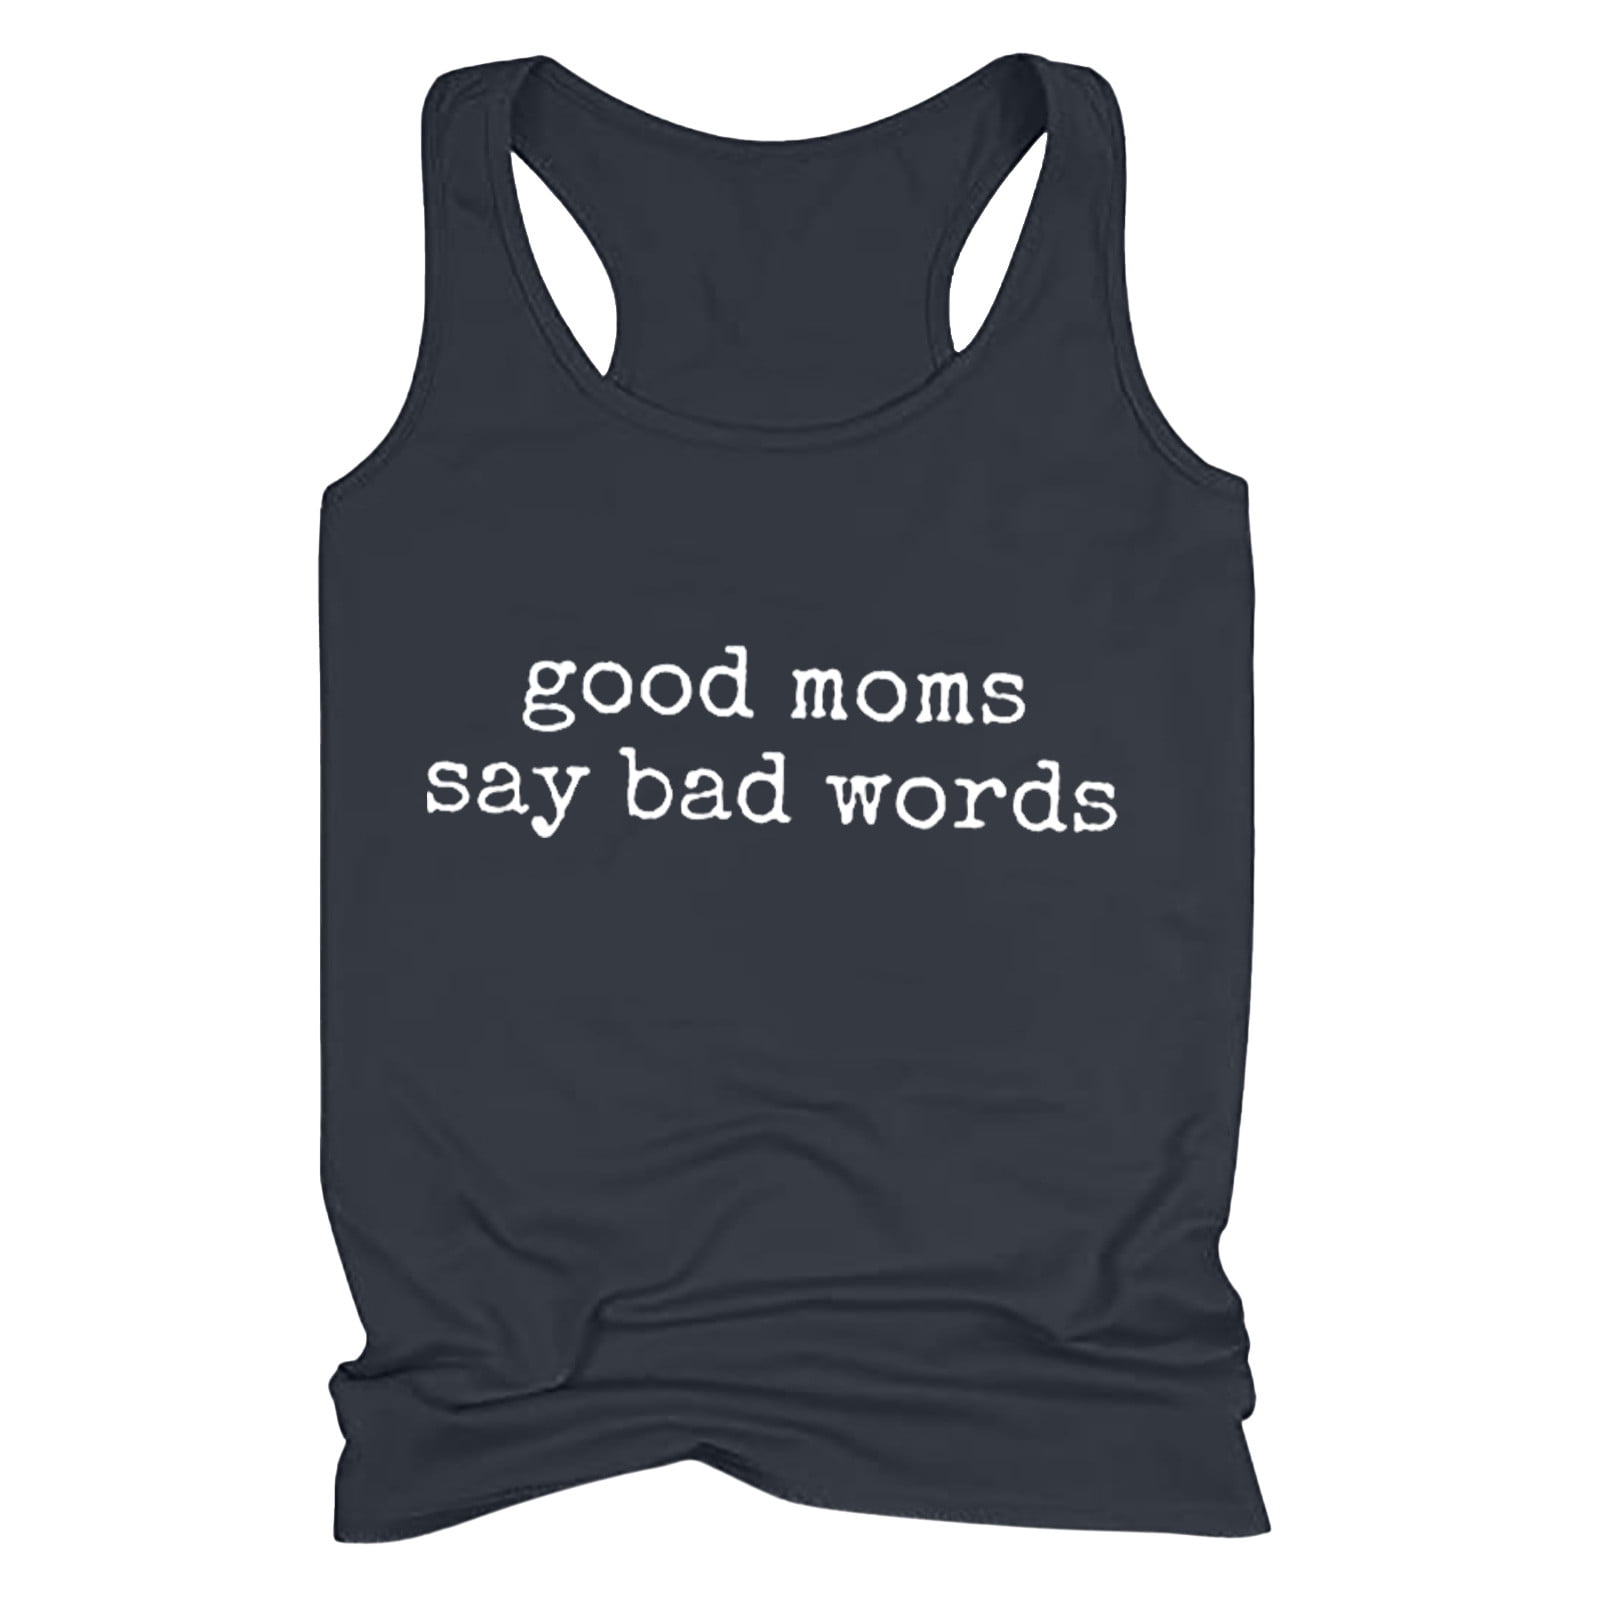 Workout Tank Top Funny Gym Shirts Workout Tank Tops With Sayings